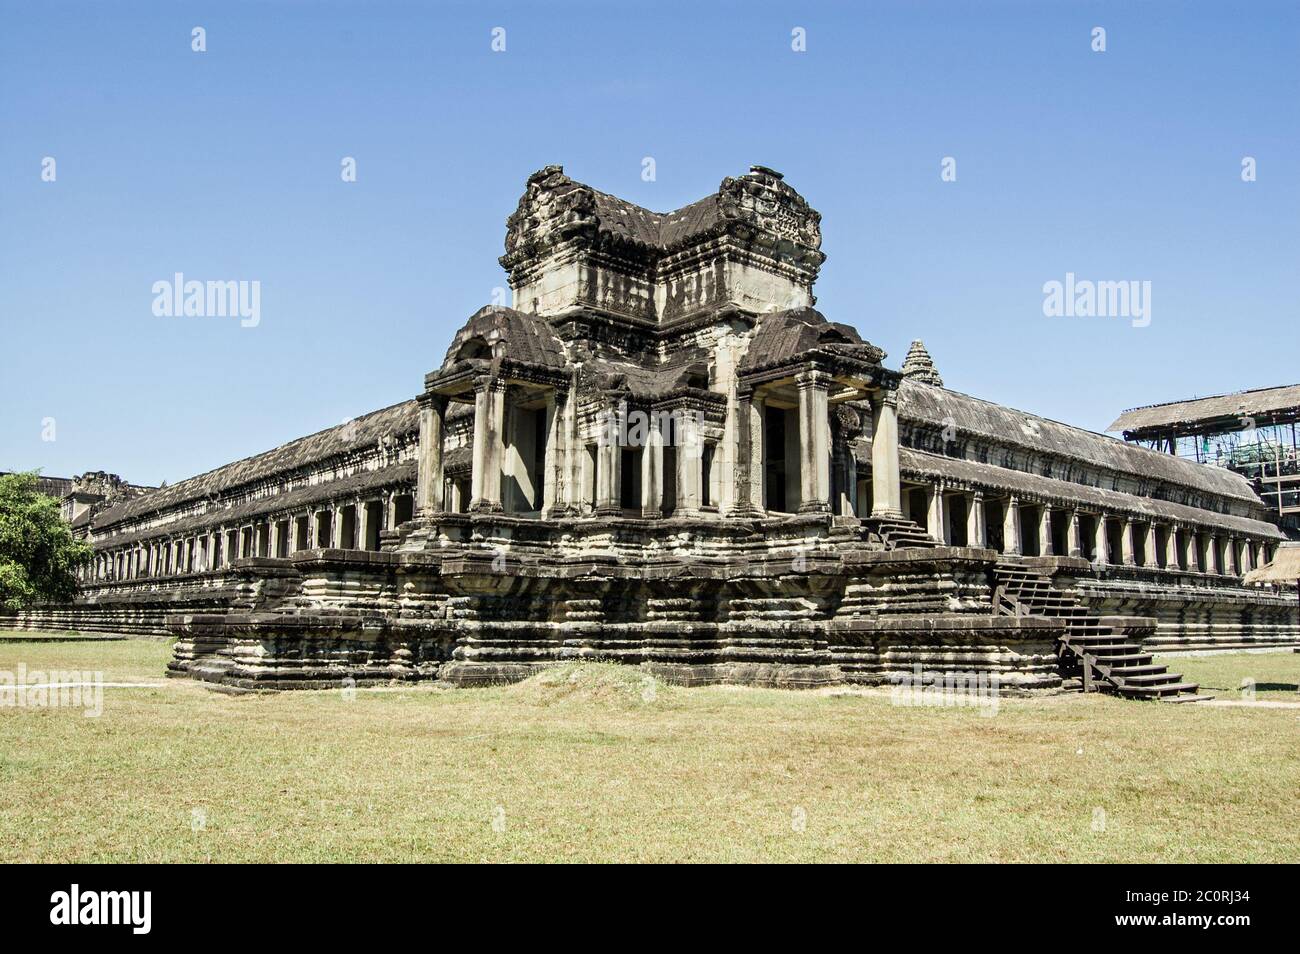 View of the ancient Khmer temple of Angkor Wat, Siem Reap, Cambodia. Stock Photo